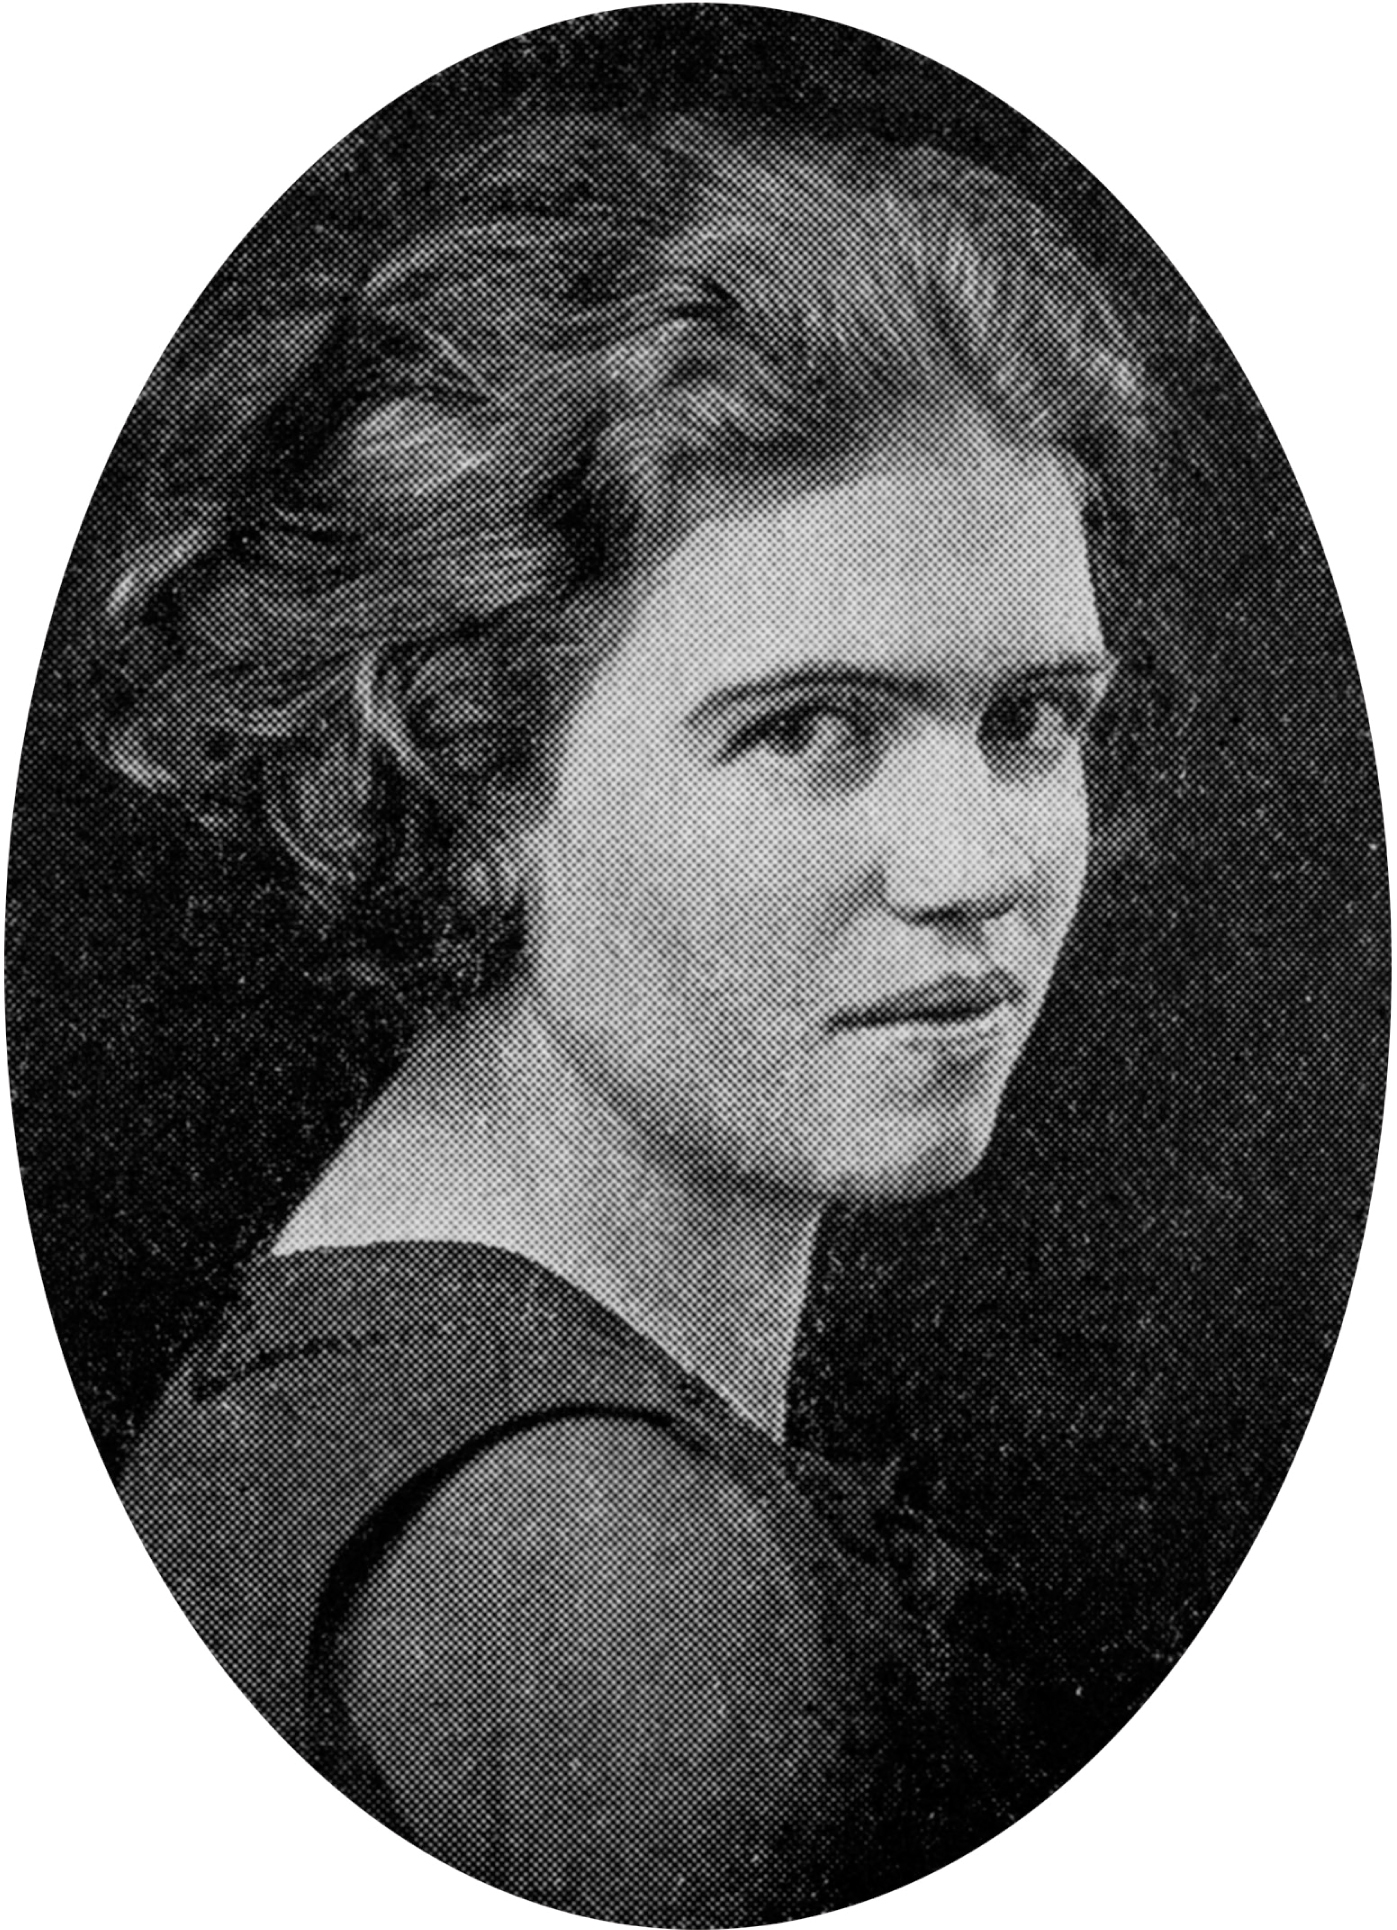 Margaret Mead senior class photo from the Barnard College yearbook 1923 - photo 3